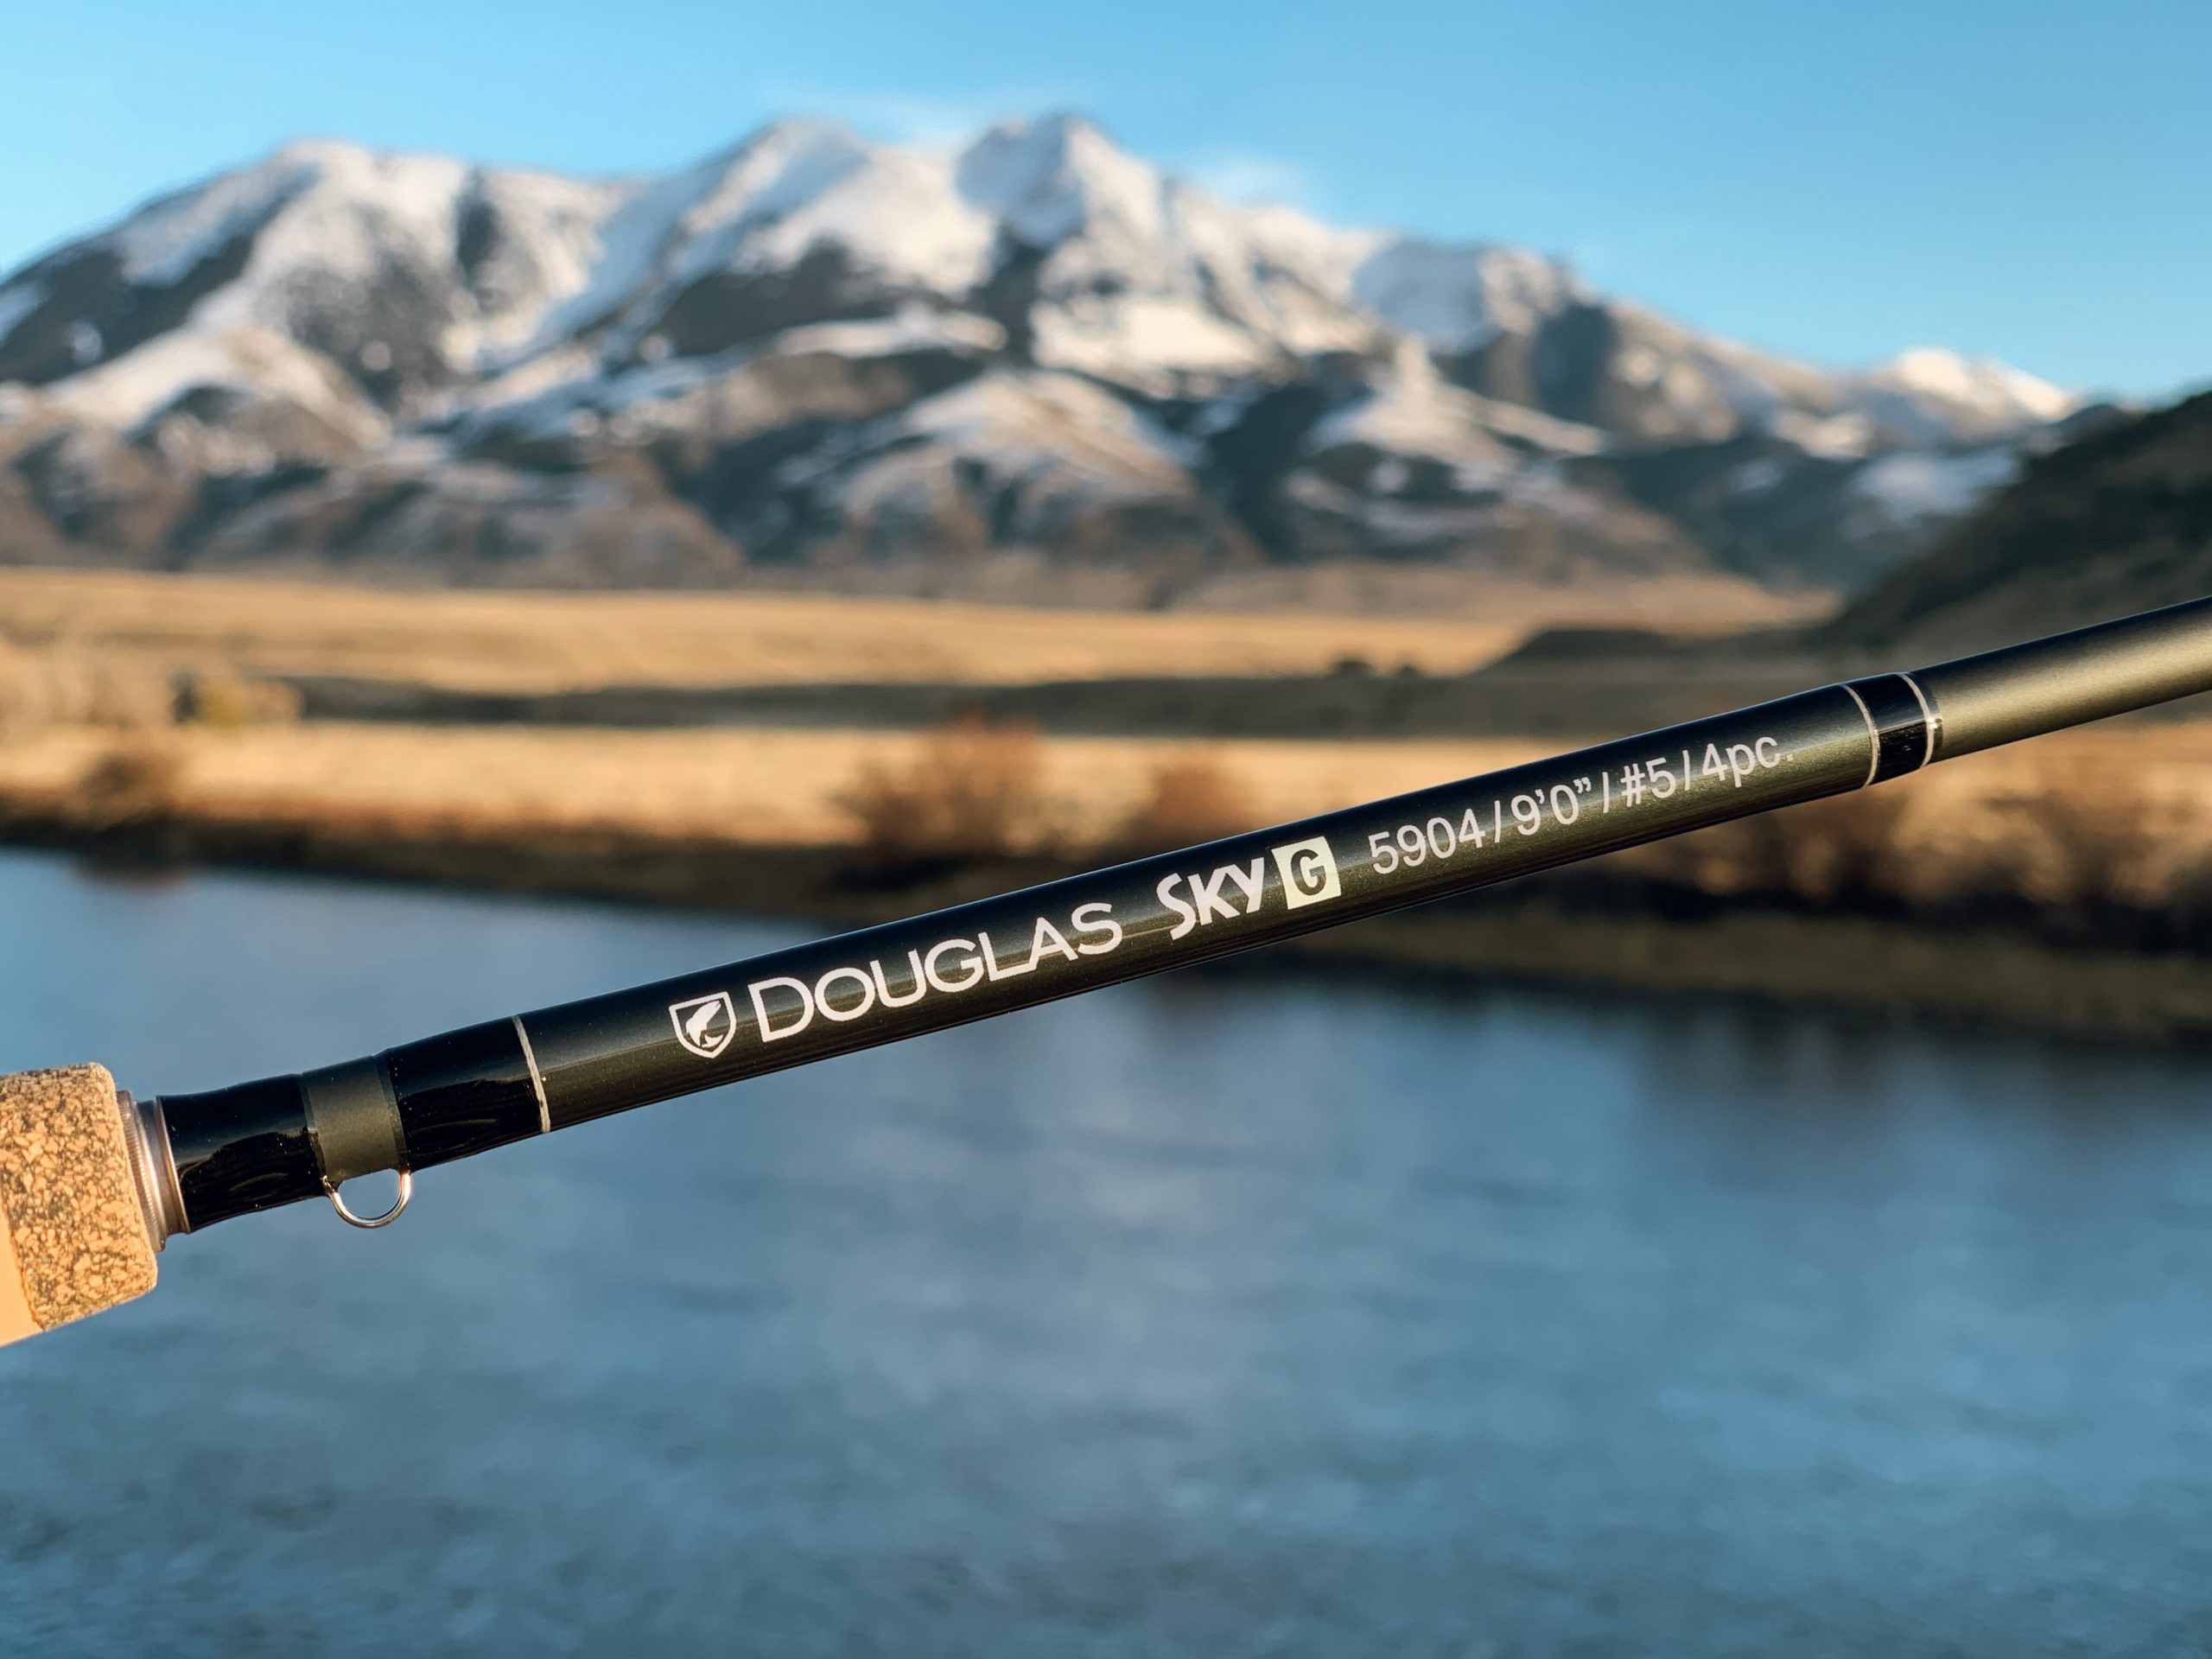 Big Sky Rod Box Review - The Ultimate Fly Rod…